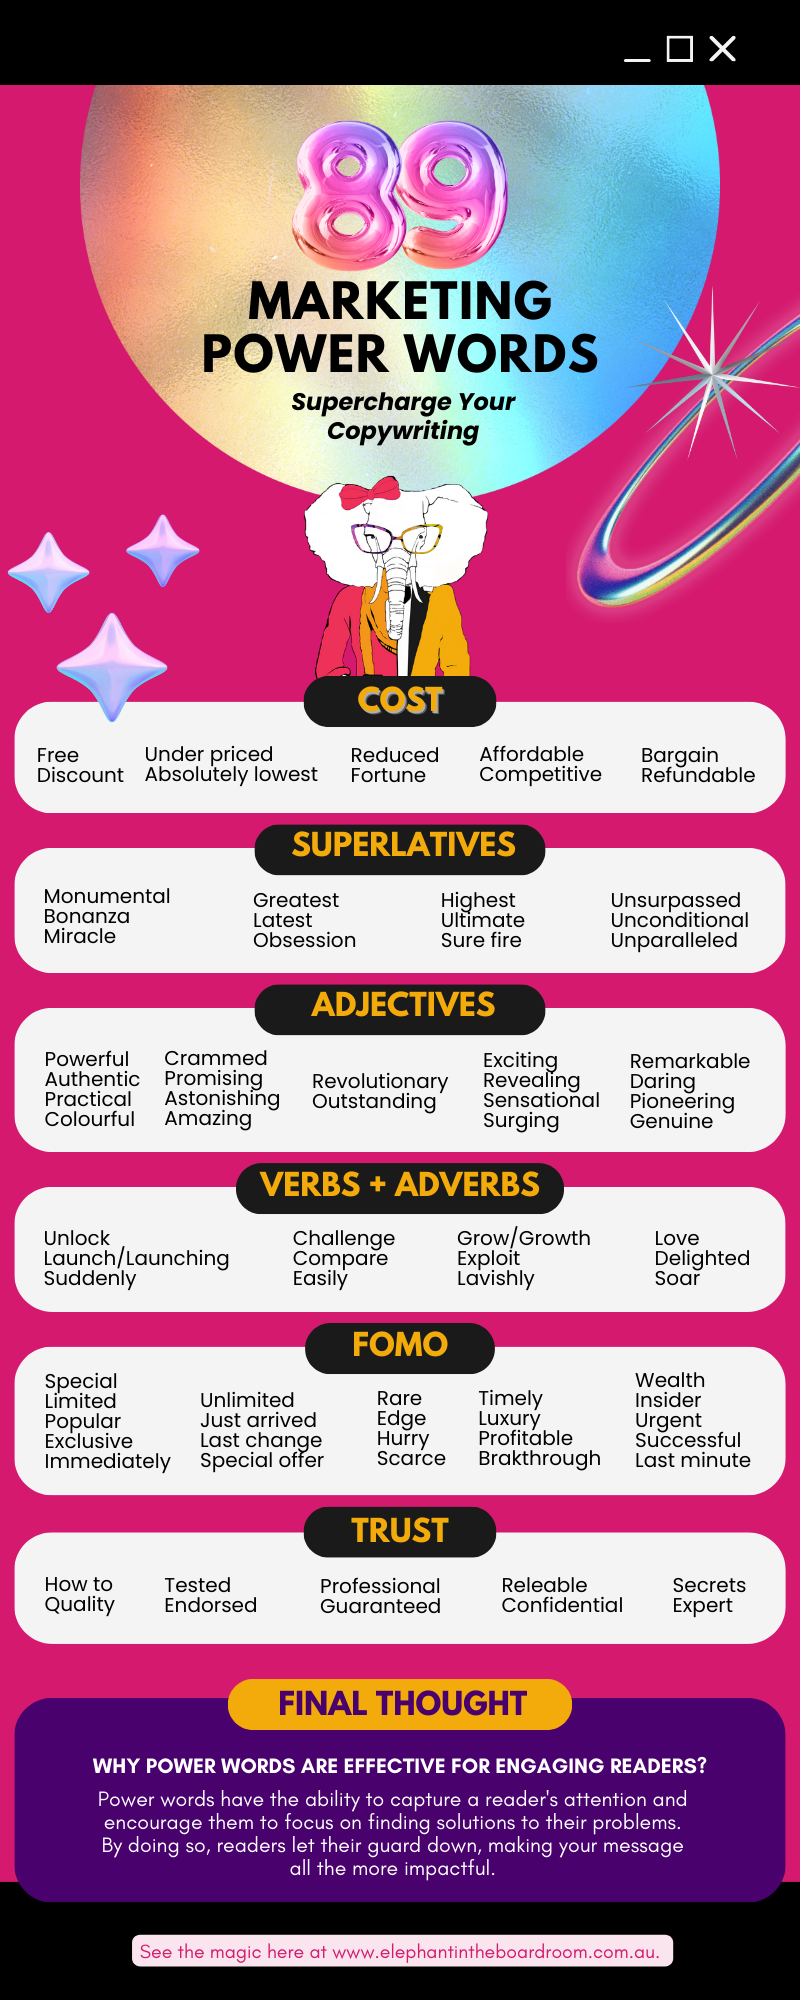 89 Marketing Power Words to Supercharge Your Copywriting